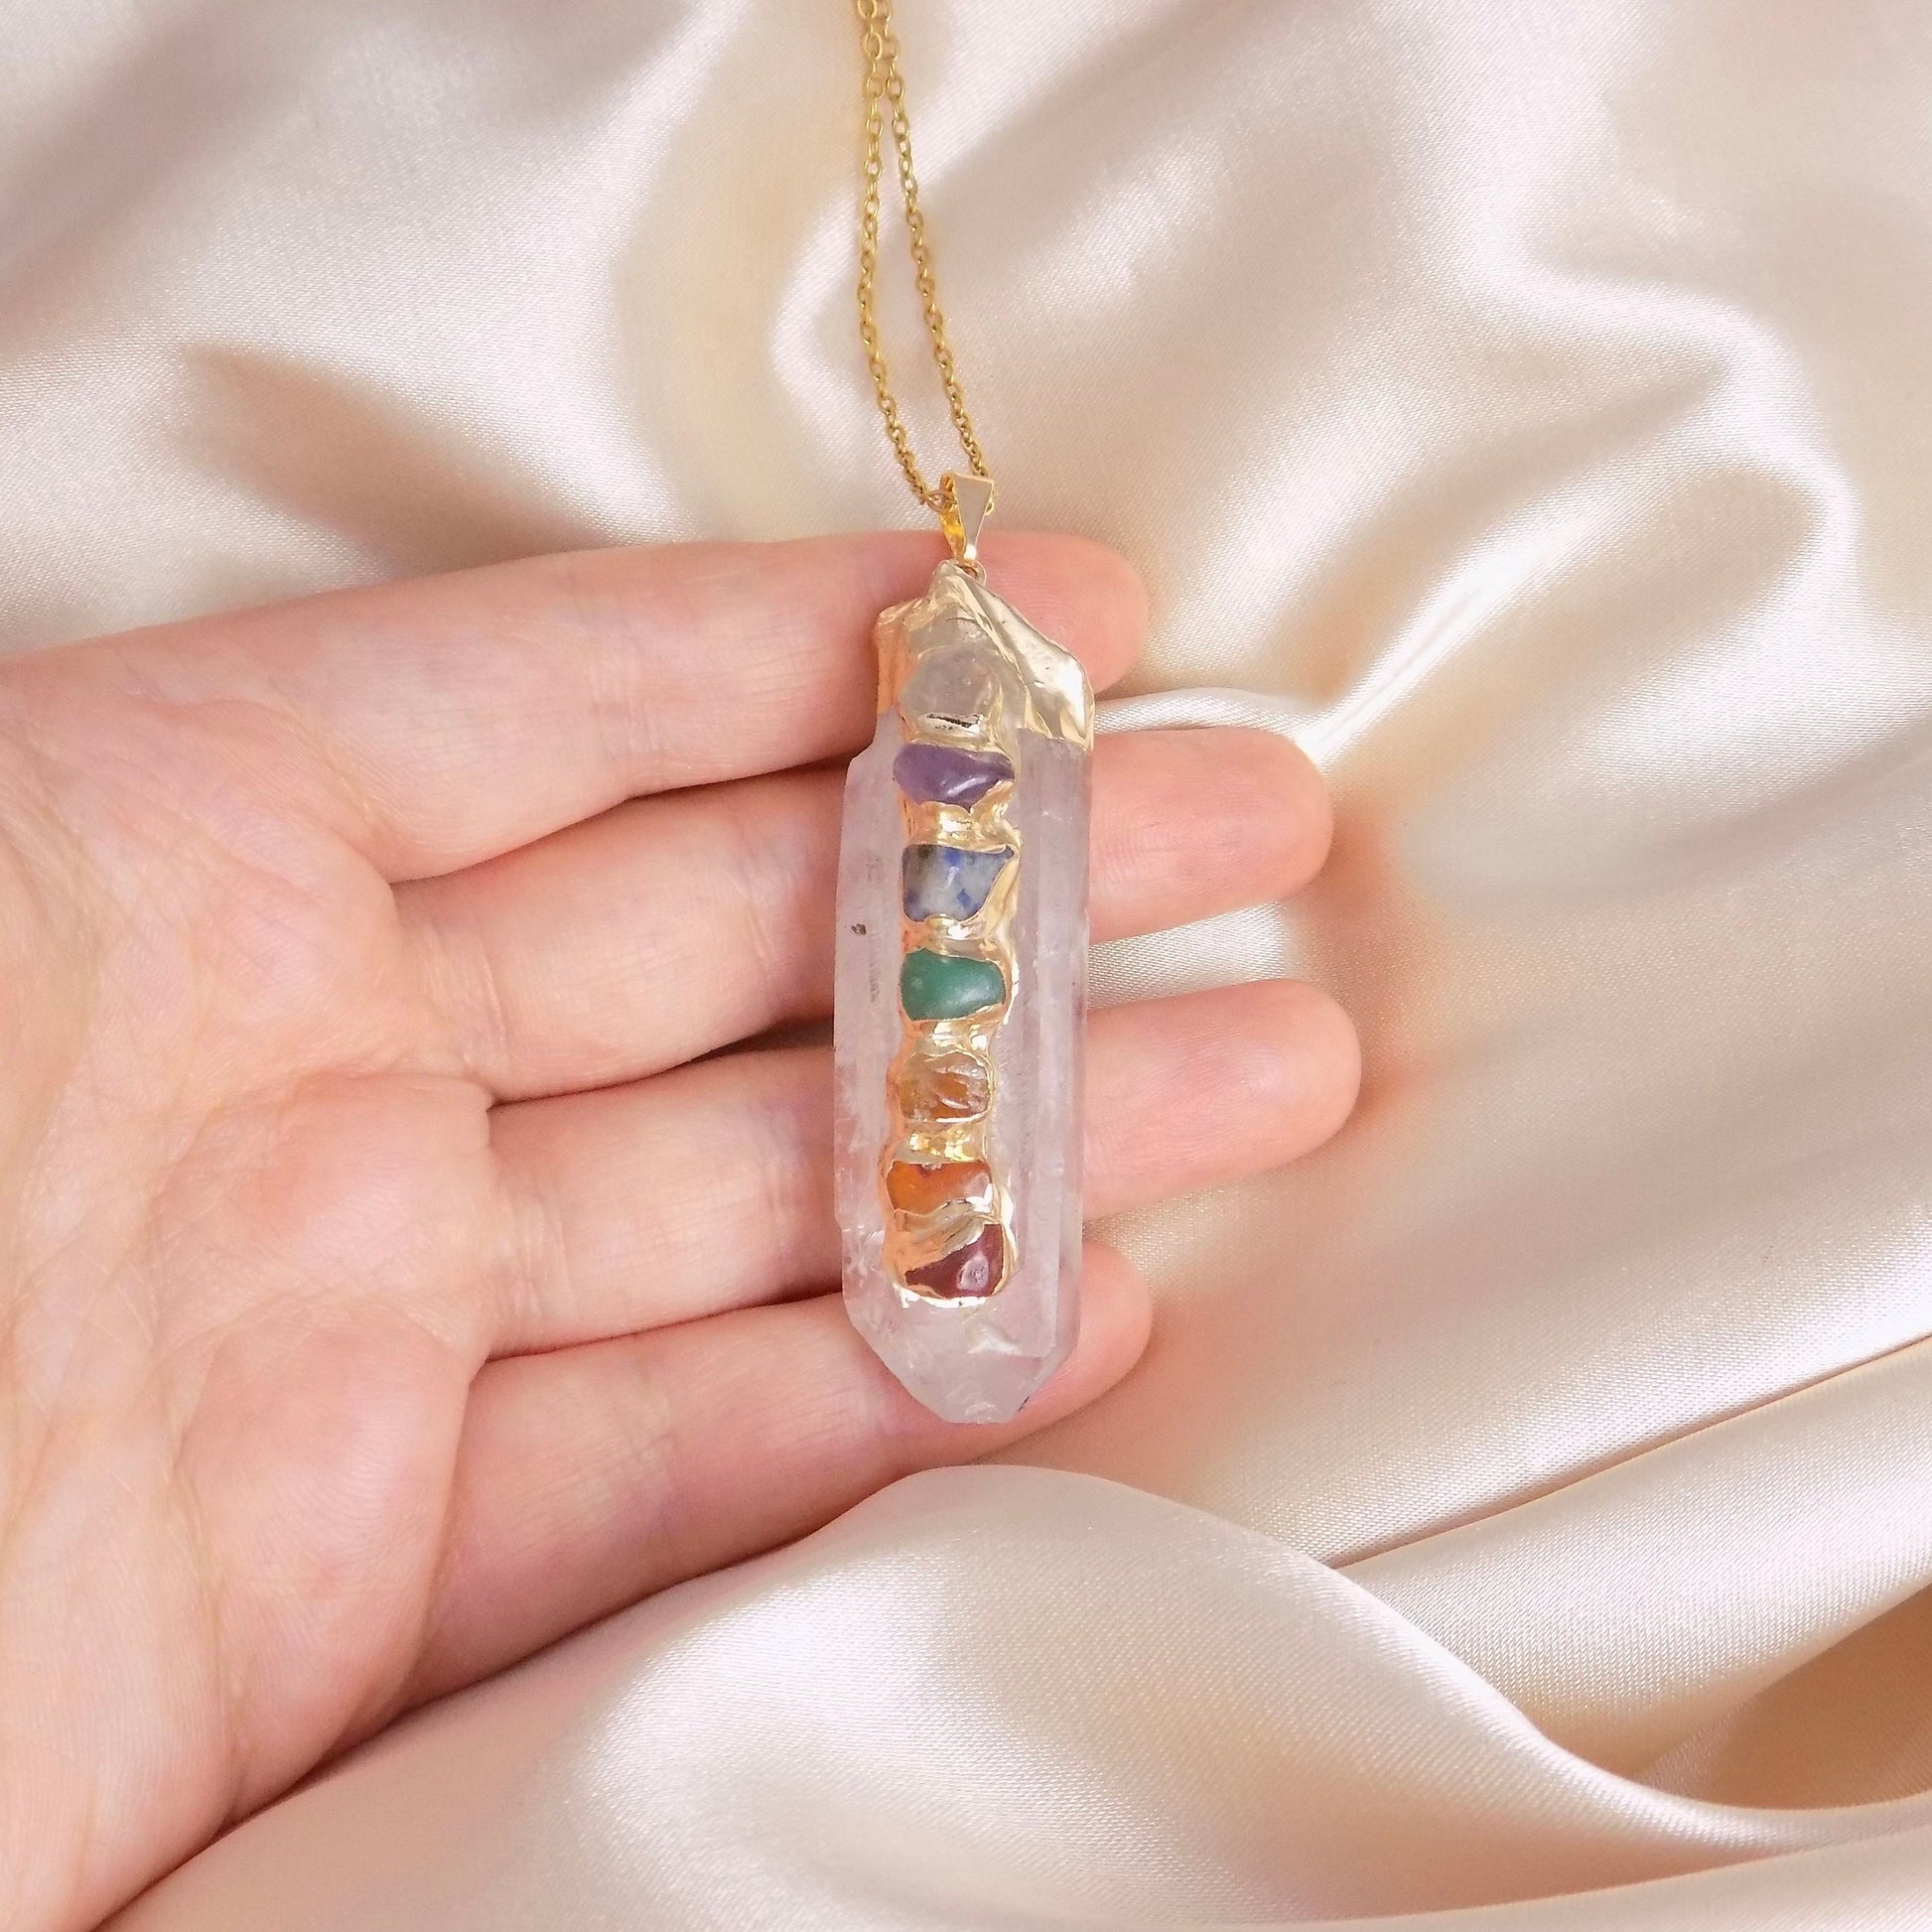 Seven Chakra Crystal Necklace Gold, Boho Large Gemstone Pendant, Christmas Gifts For Her, G13-548